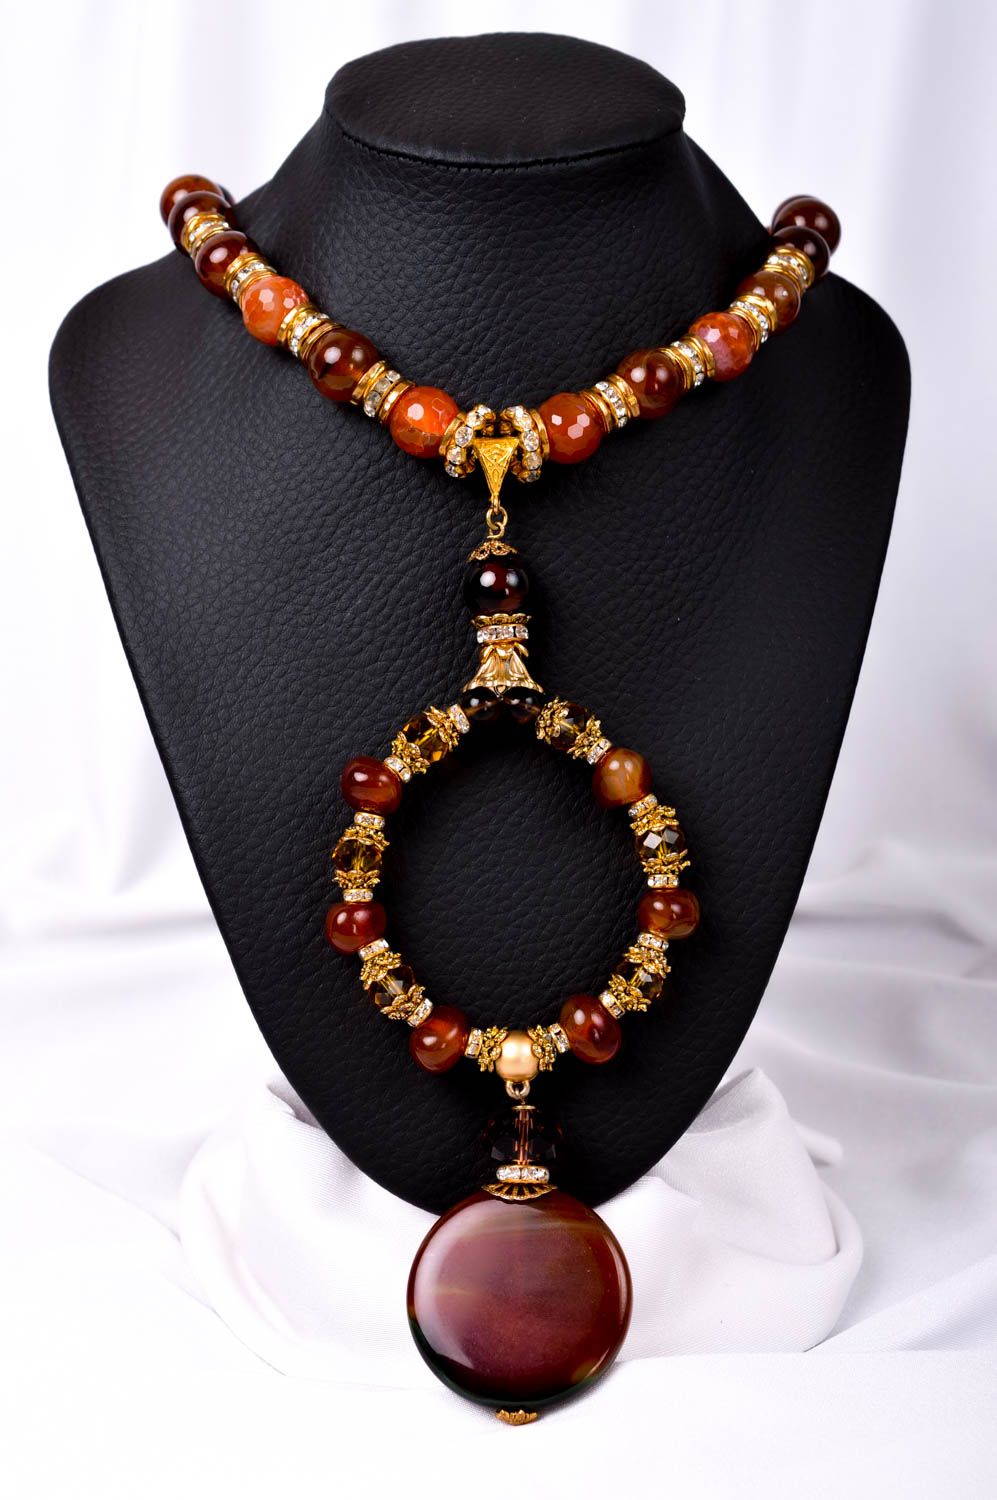 Handmade necklace designer necklace with natural stones unusual accessory photo 1